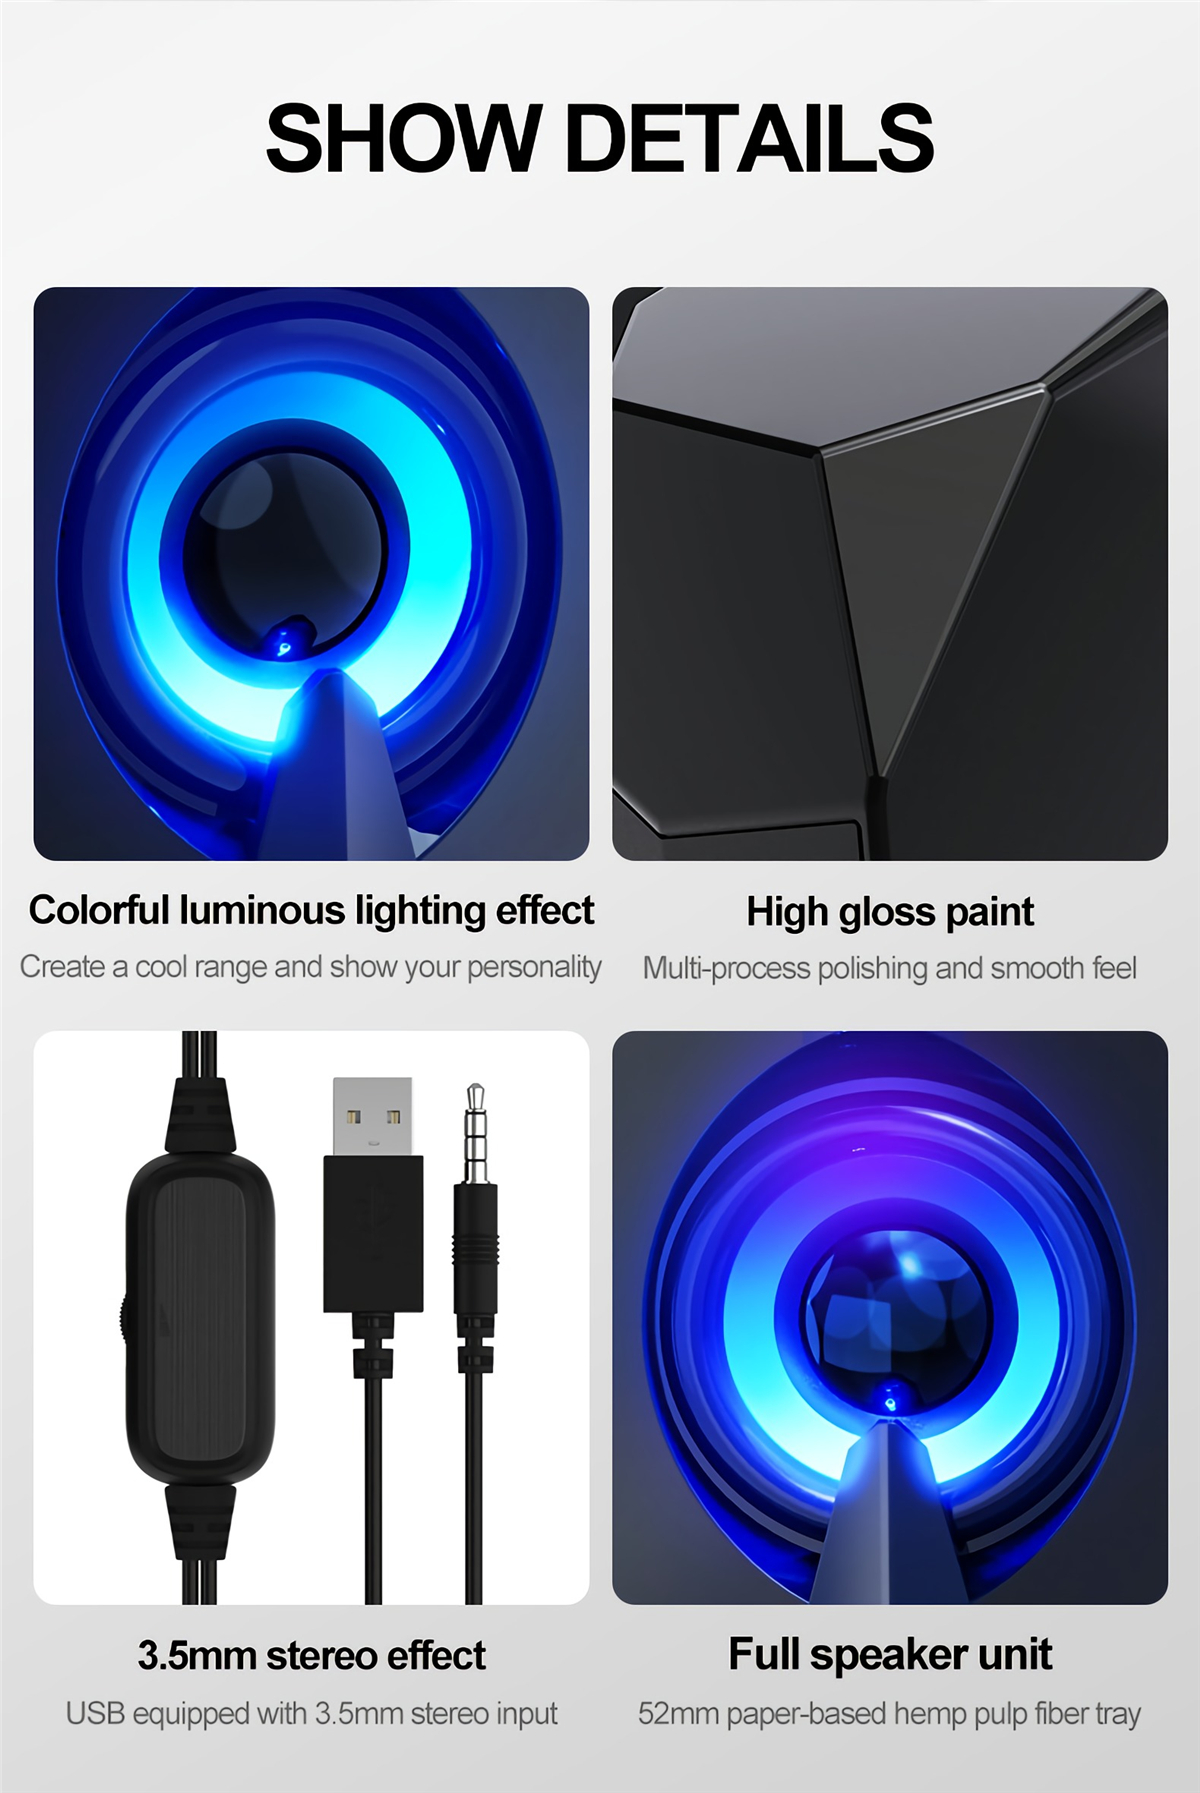 T-WOLF-S5-Colorful-Luminous-Speaker-4D-Surround-Sound-Wired-Computer-Speaker-Gaming-Loudspeaker-for--1850667-7